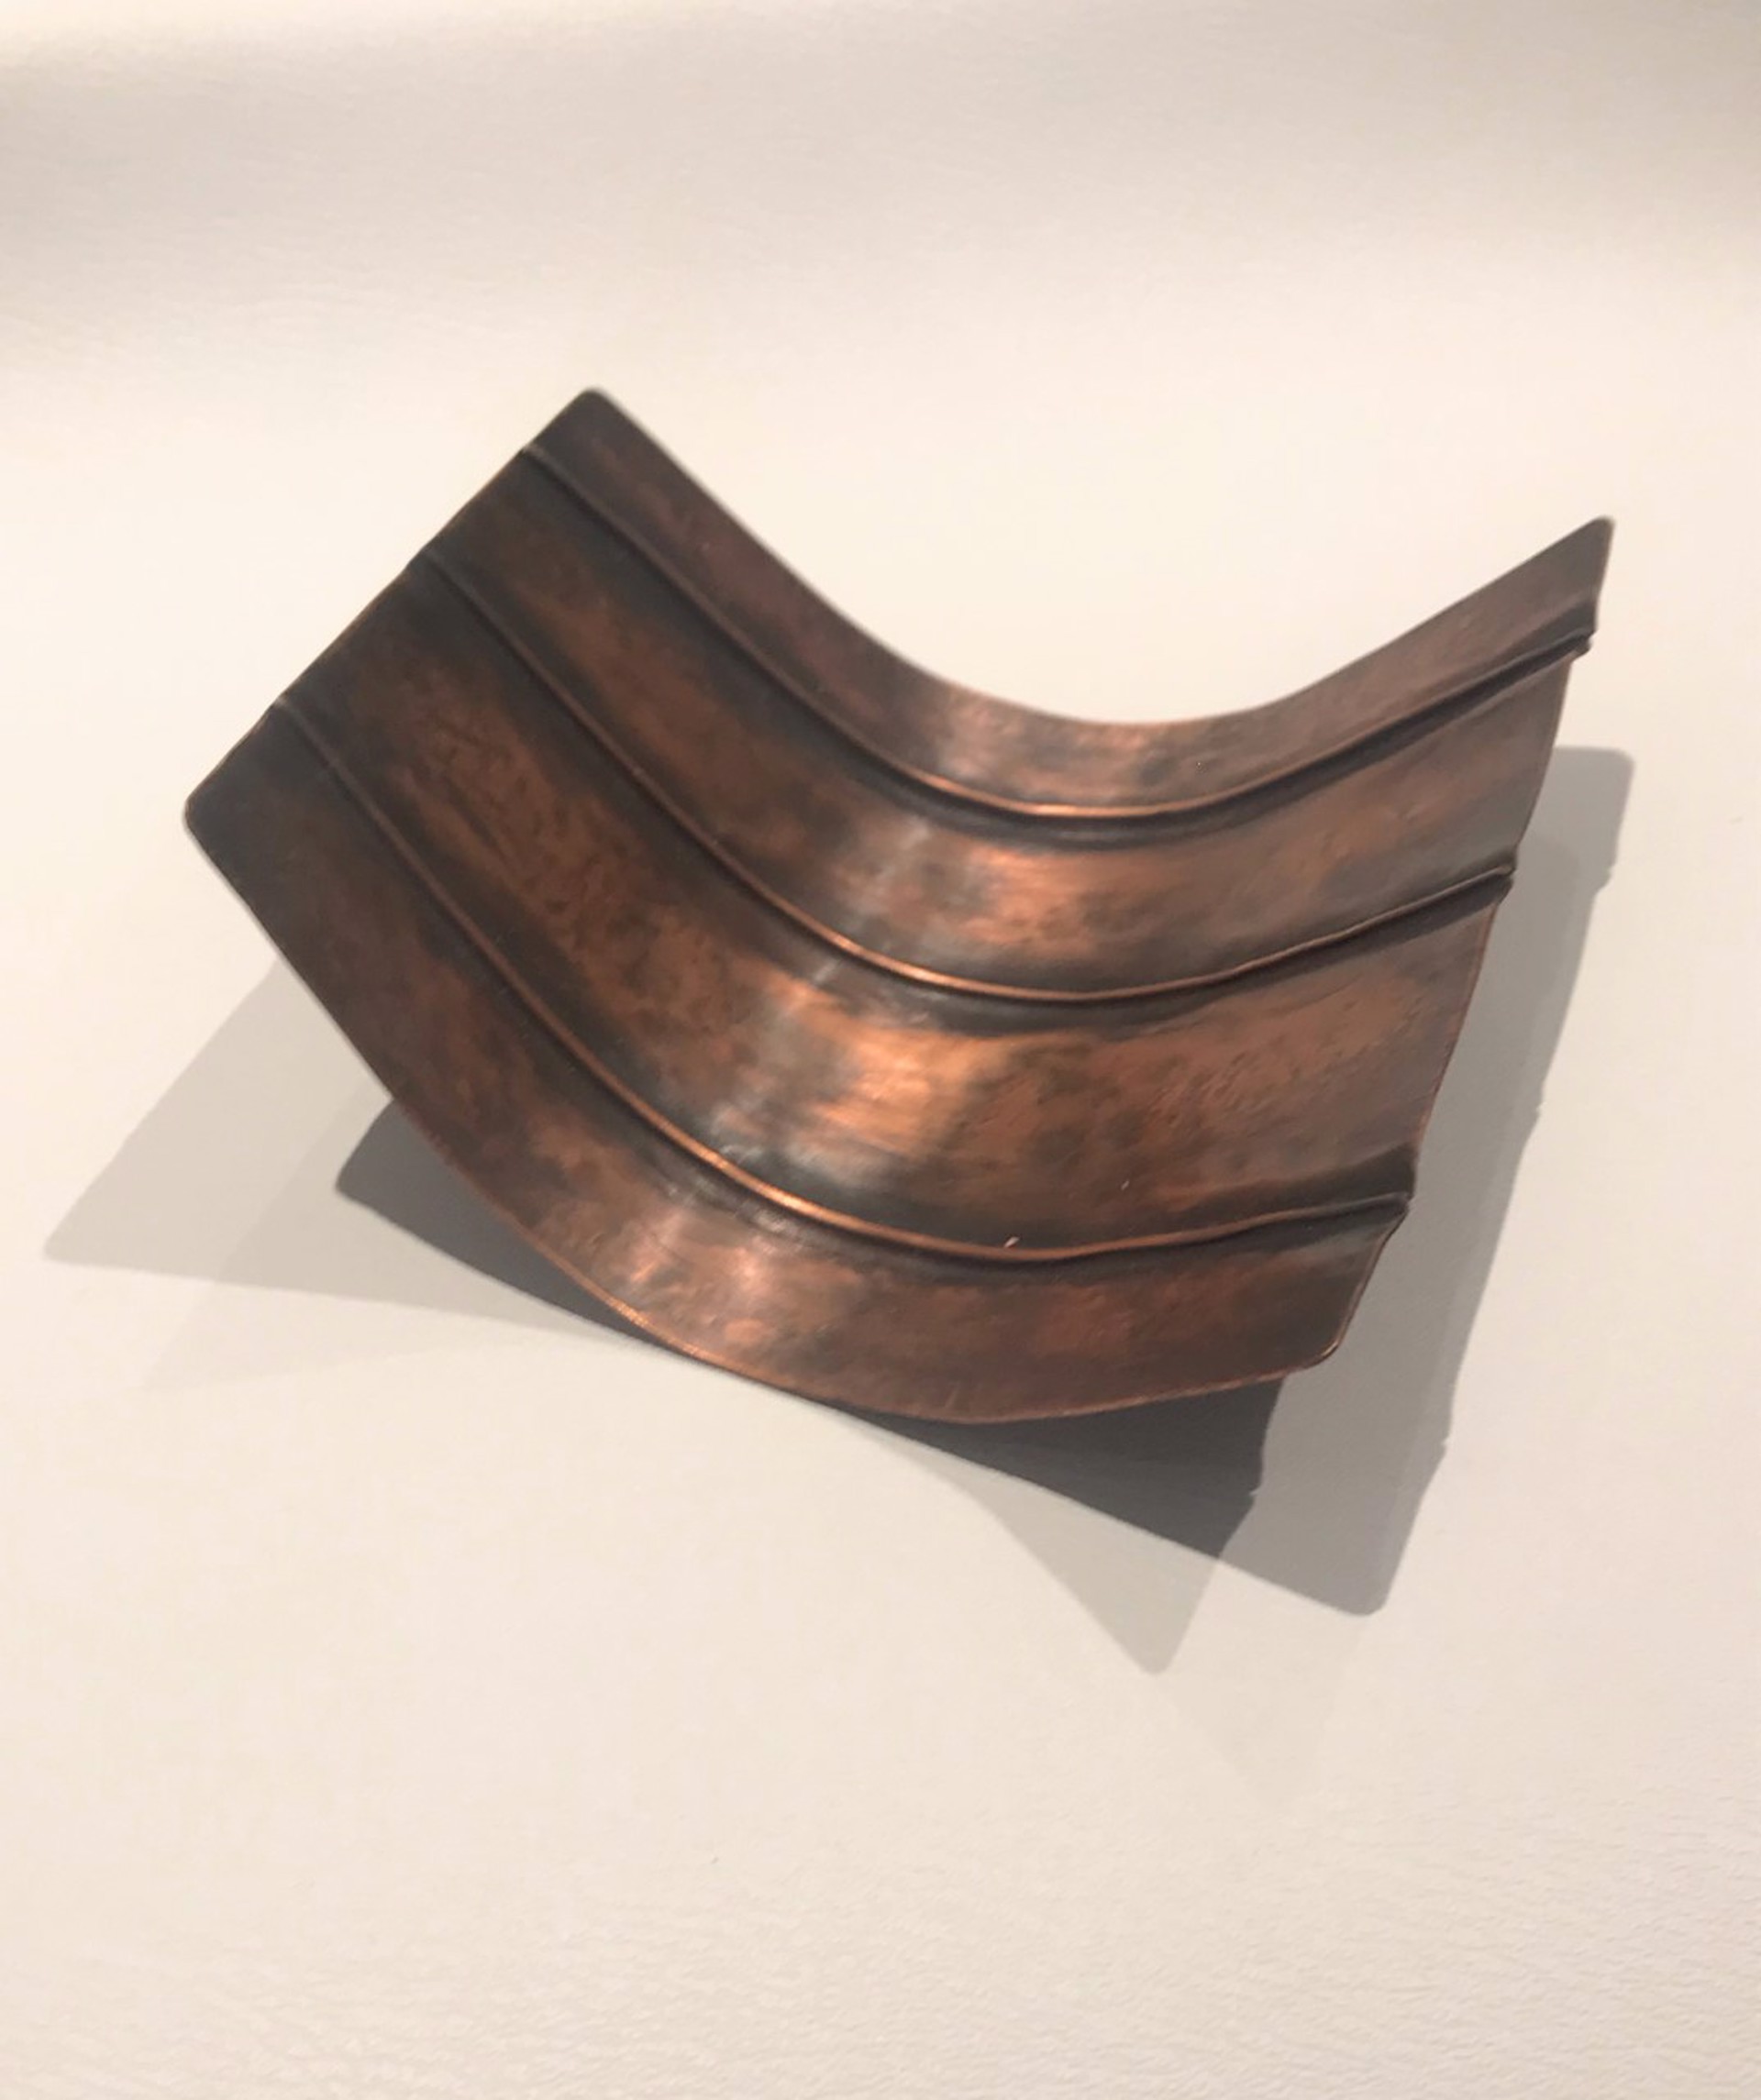 Copper Sculpture with folds by Nicole Josette